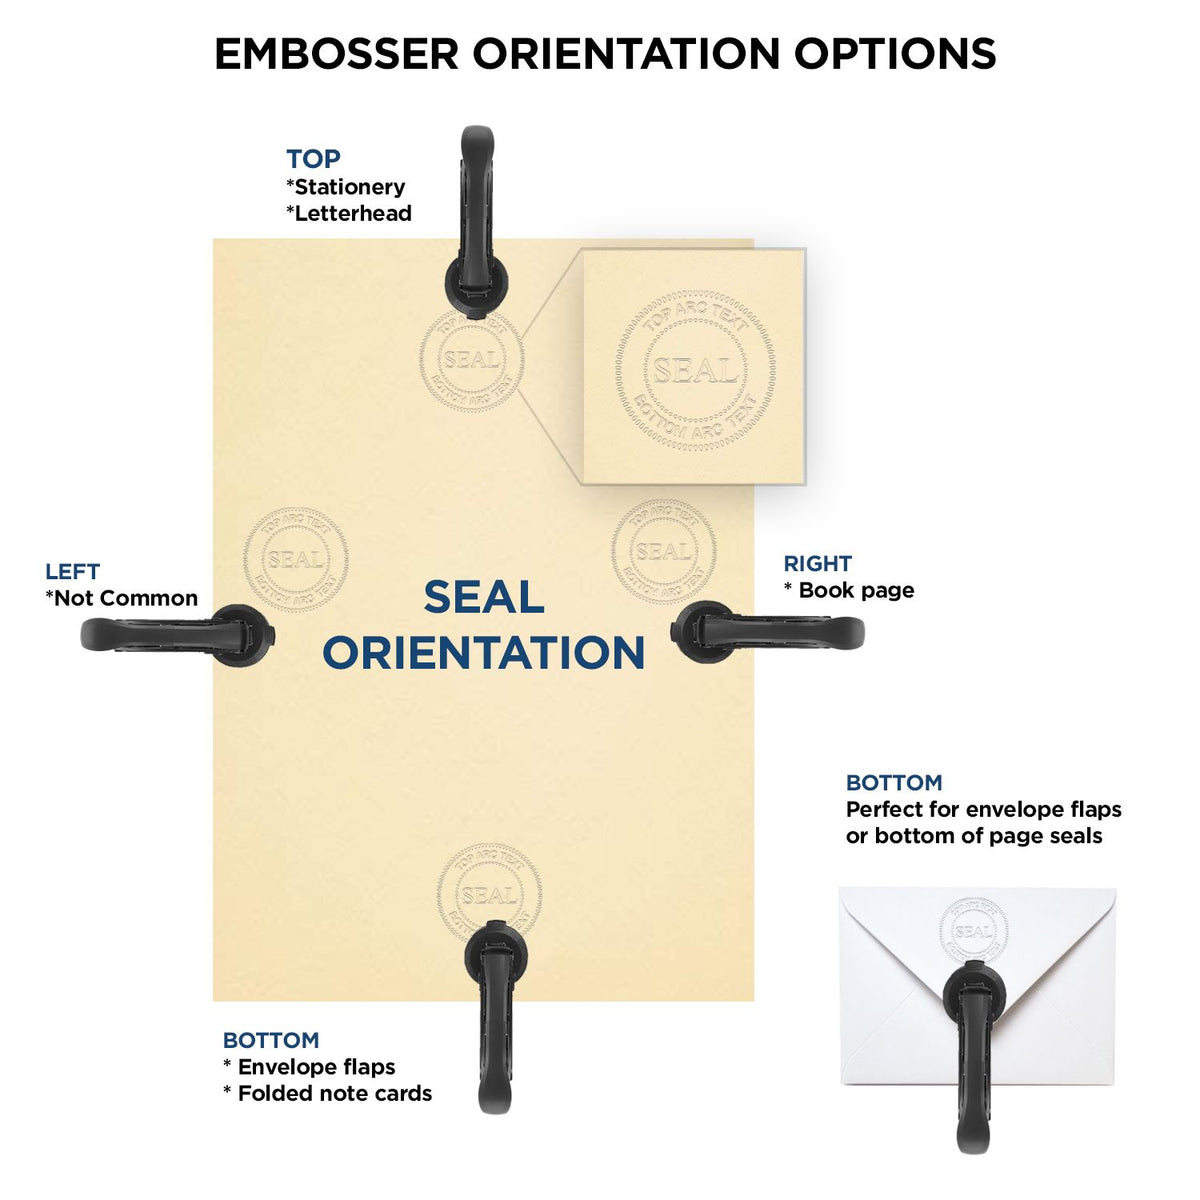 An infographic for the Extended Long Reach Alaska Surveyor Embosser showing embosser orientation, this is showing examples of a top, bottom, right and left insert.